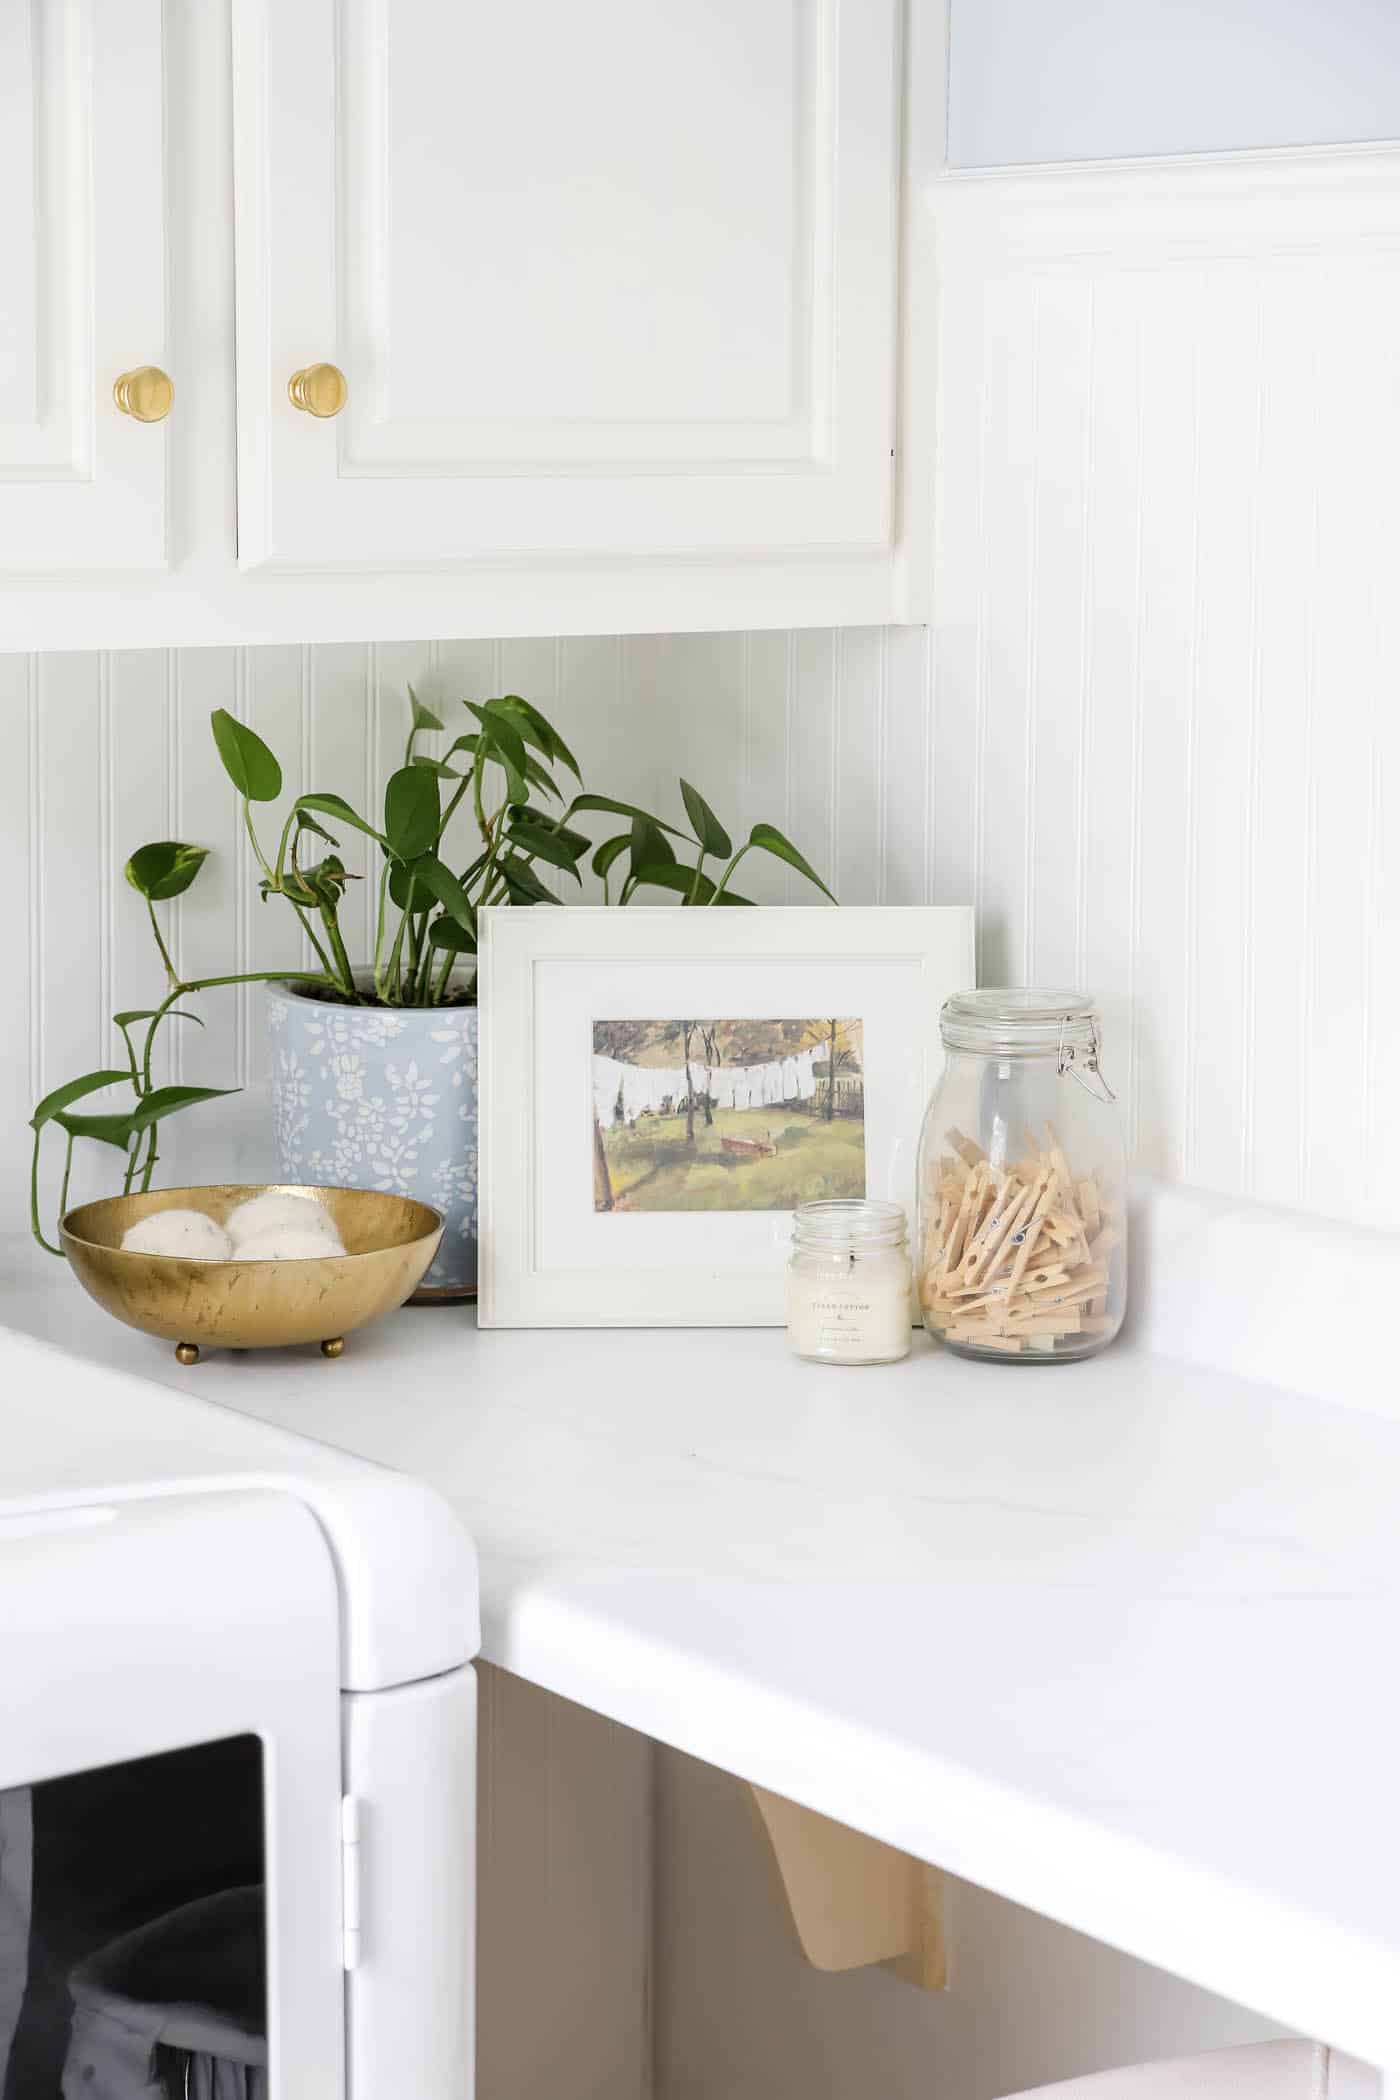 greenery in the laundry room makeover ideas